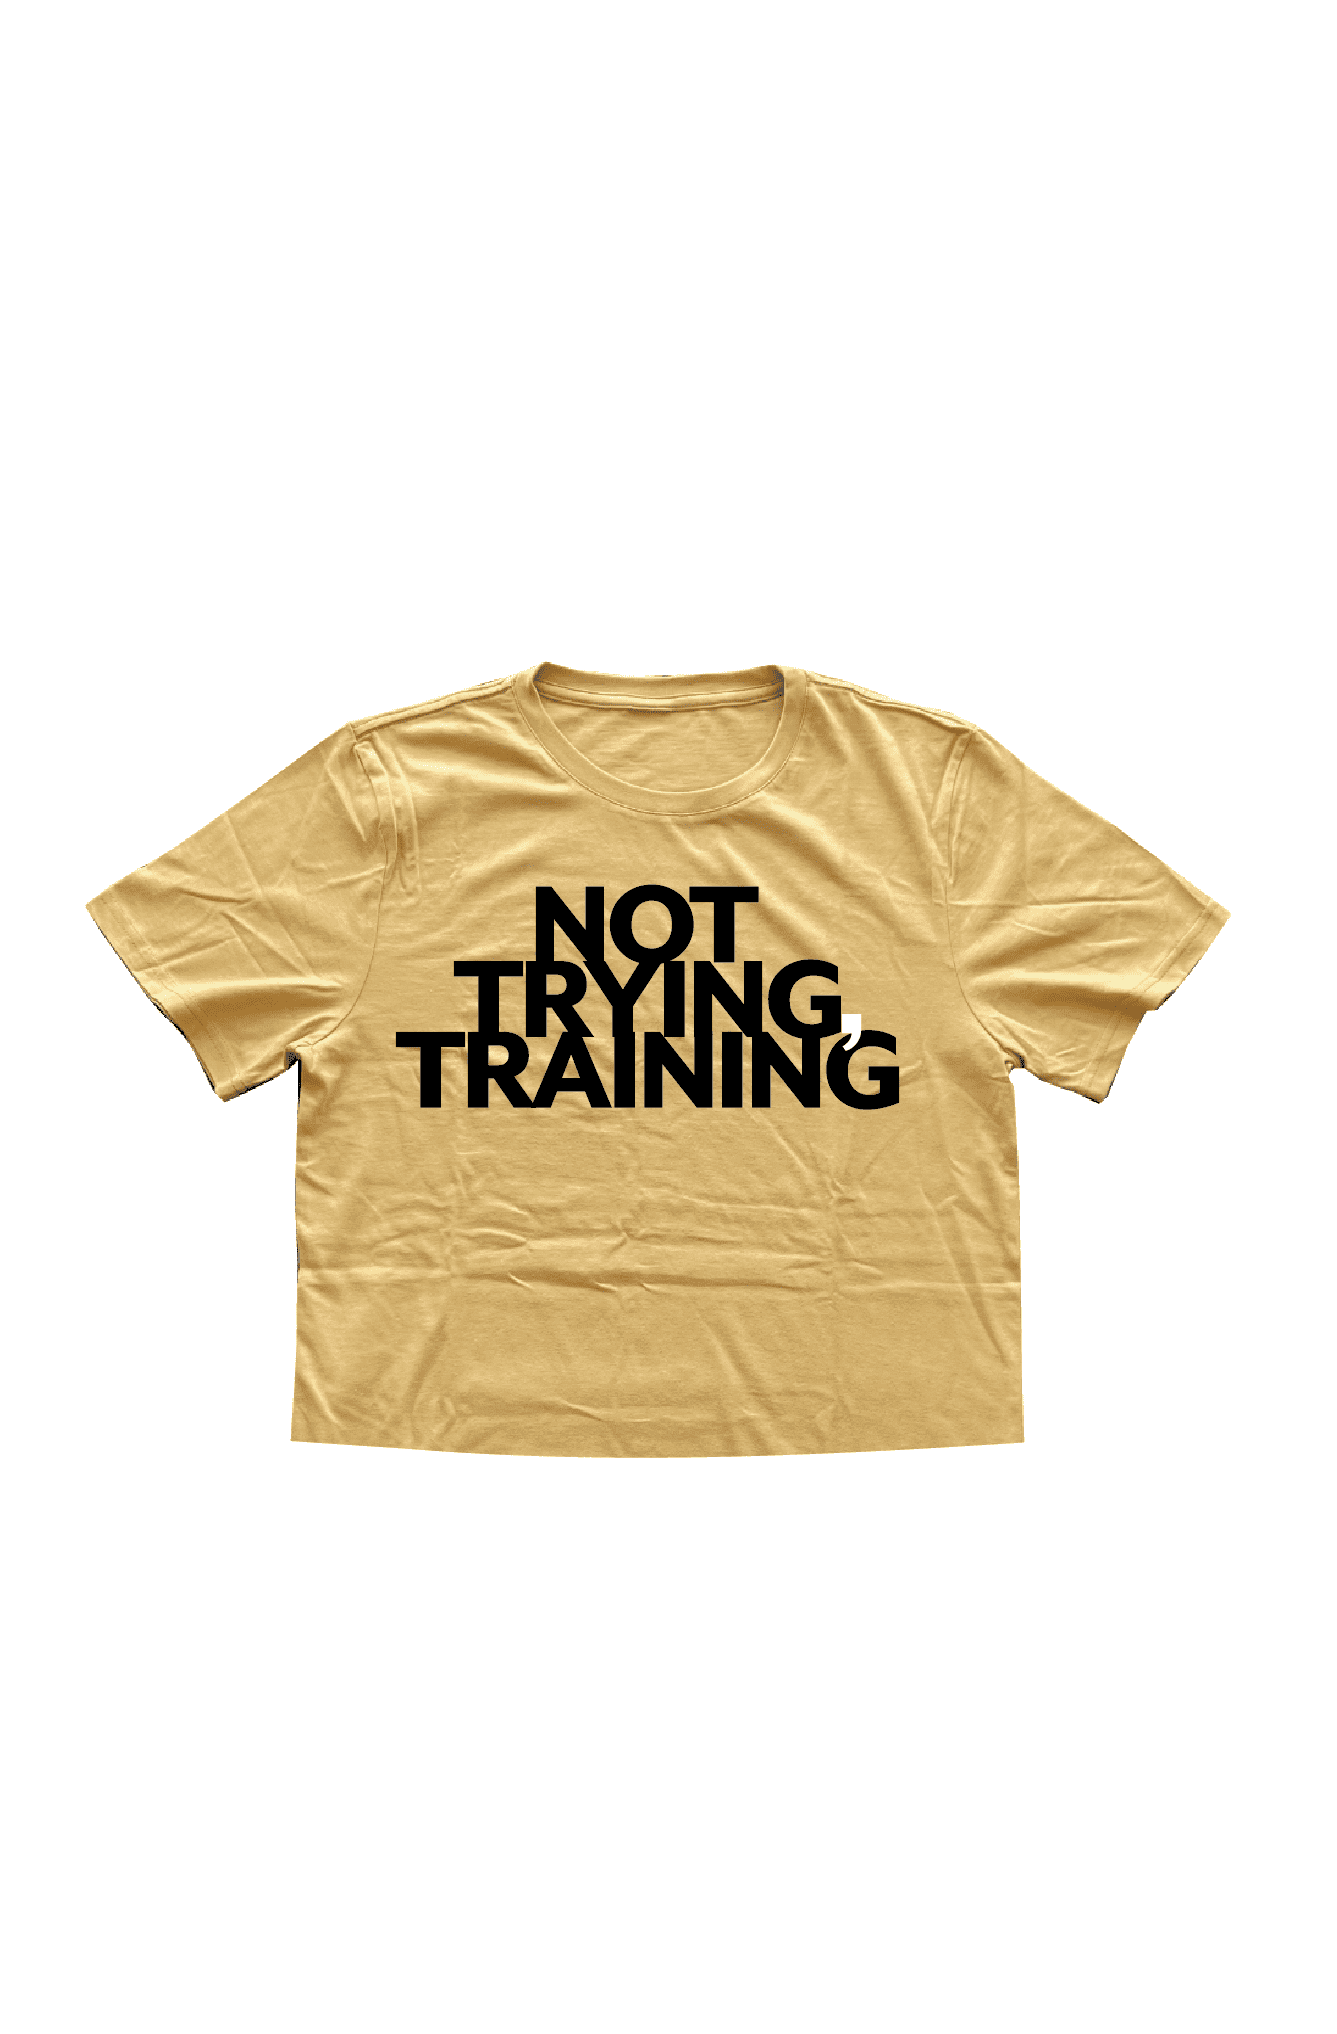 Not Trying, Training